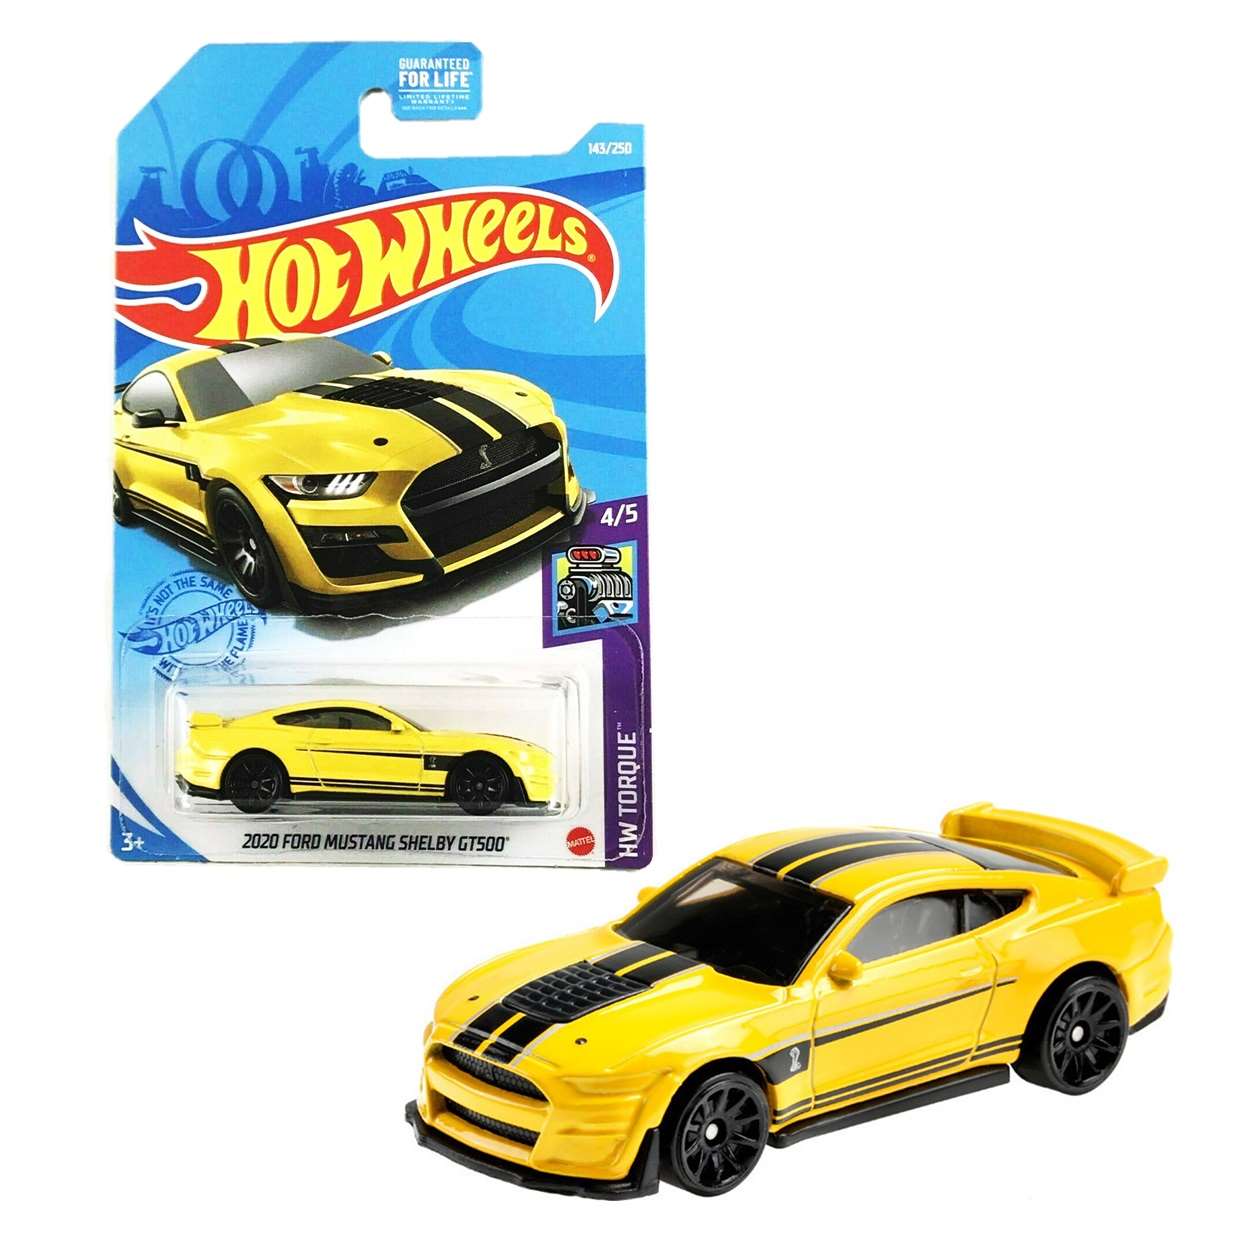 2020 Ford Mustang Shelby Gt500 4/5 Hot Wheels Hw Torque